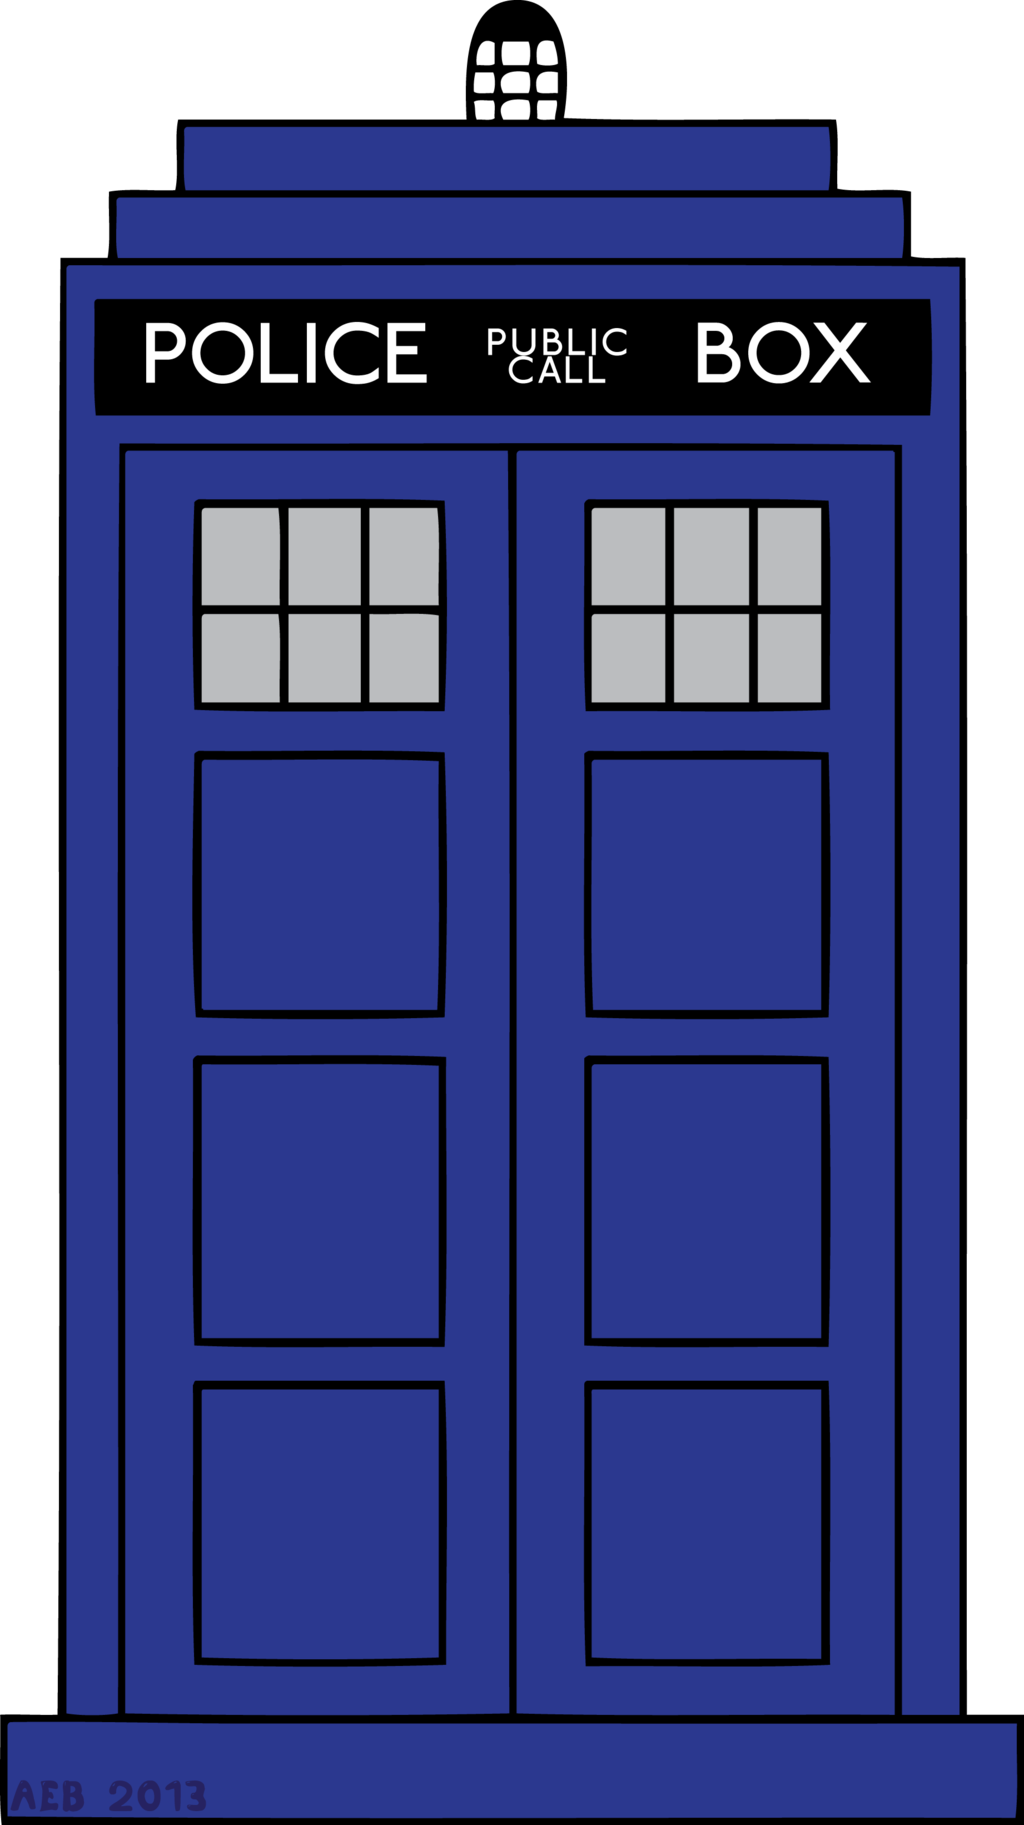 Download Tardis clipart easy, Tardis easy Transparent FREE for download on WebStockReview 2021